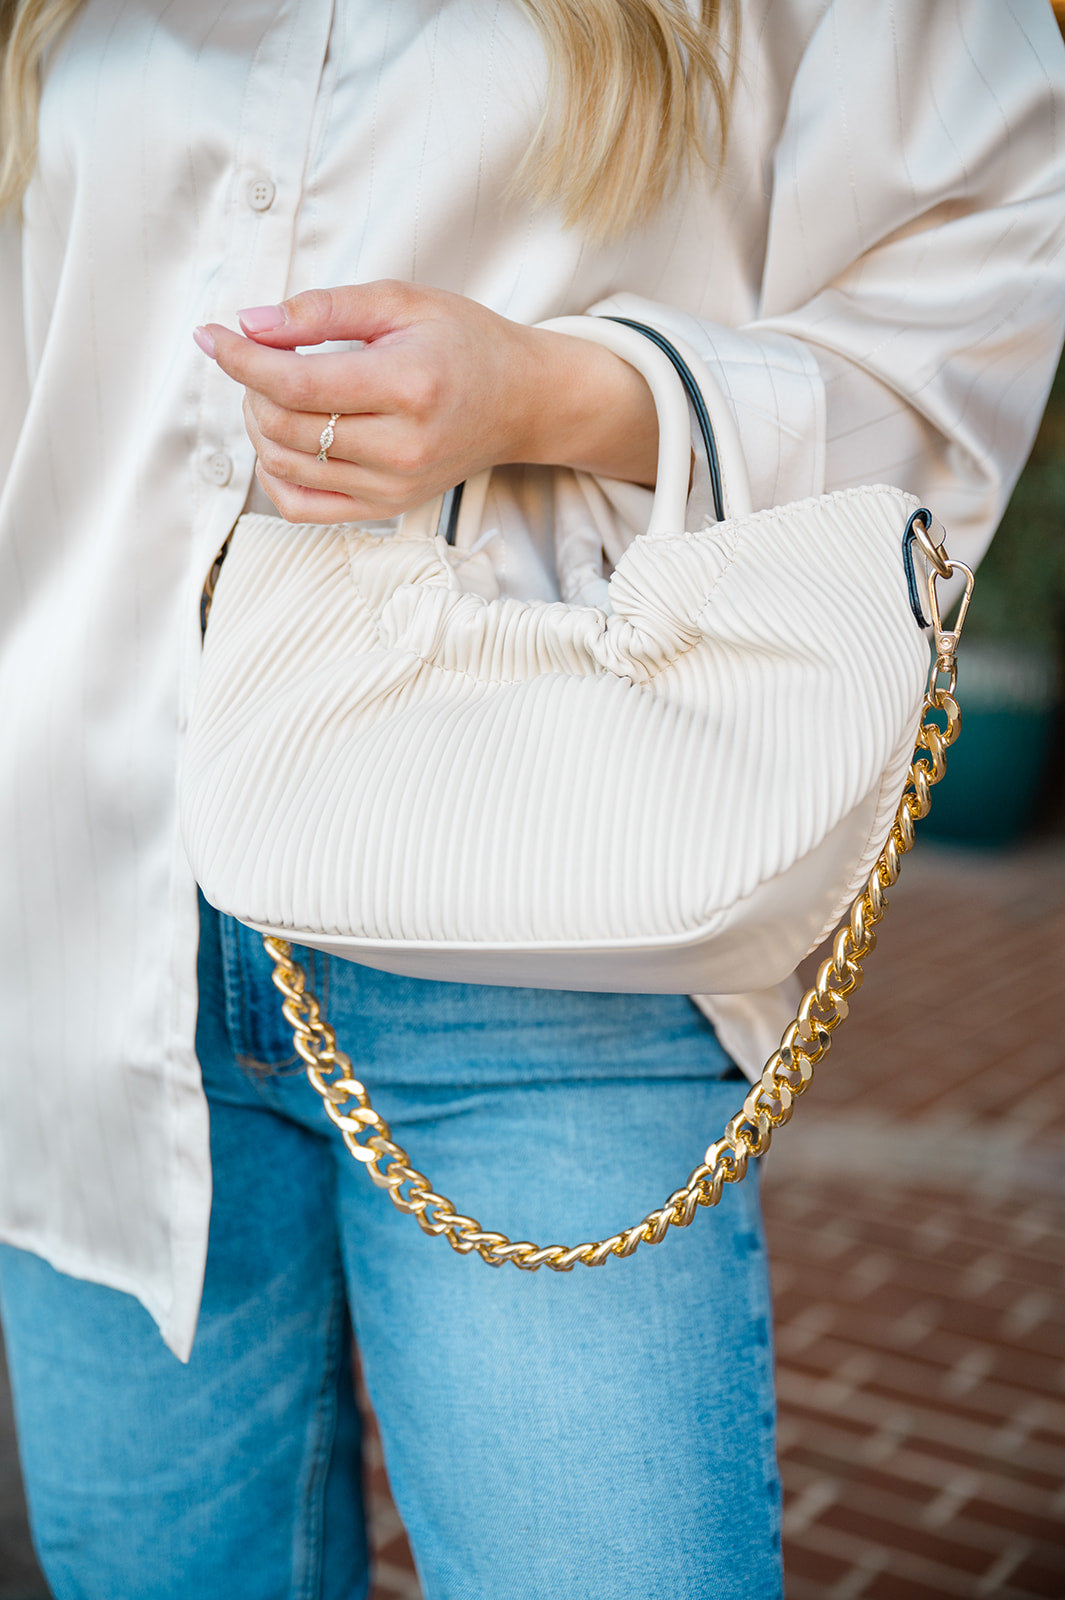 Ribbed Purse with Gold Chain